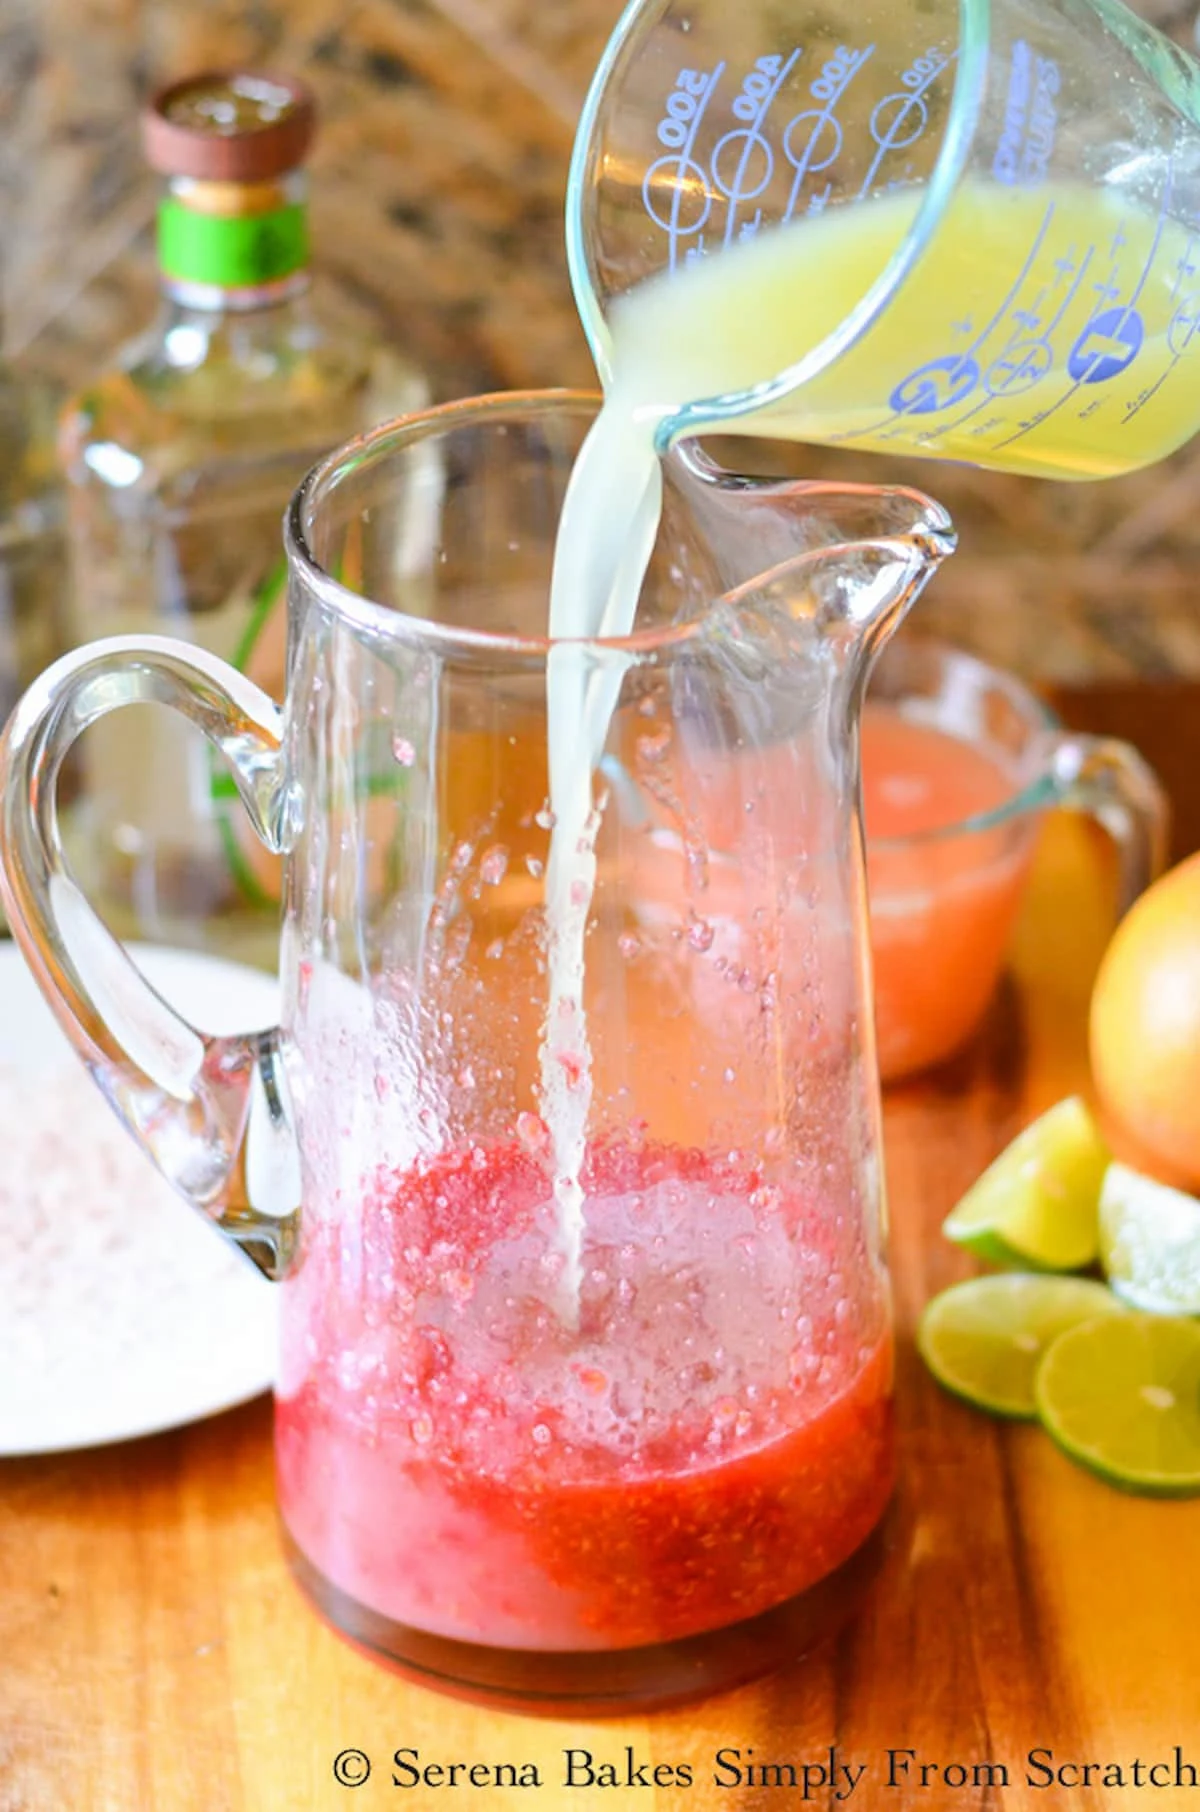 Lime Juice being poured into a glass pitcher with macerated raspberries in it.